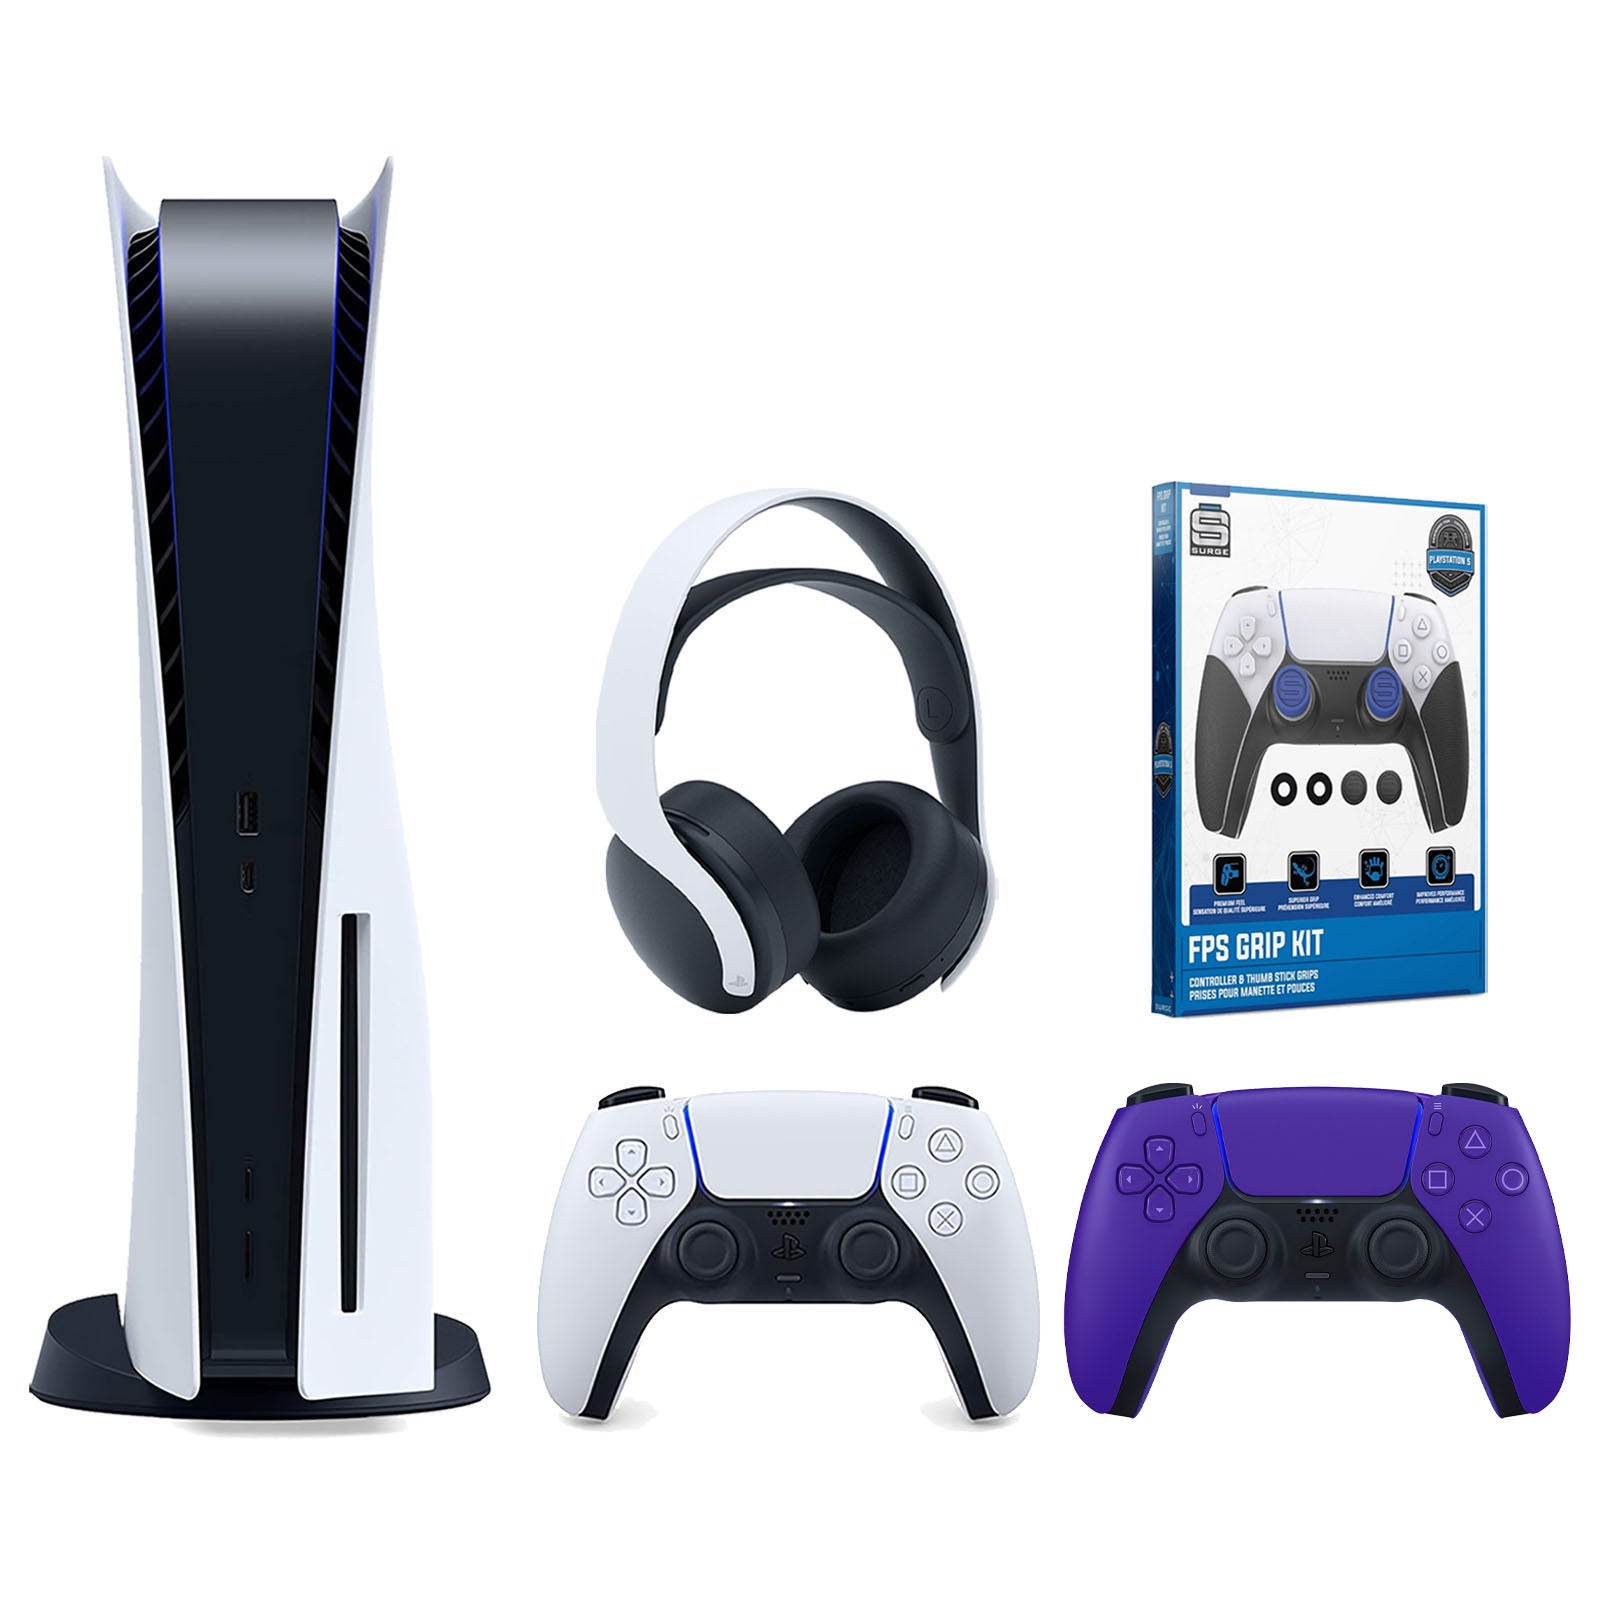 Sony Playstation 5 Disc Version Console with Extra Purple Controller, White PULSE 3D Headset and Surge FPS Grip Kit With Precision Aiming Rings Bundle - Pro-Distributing